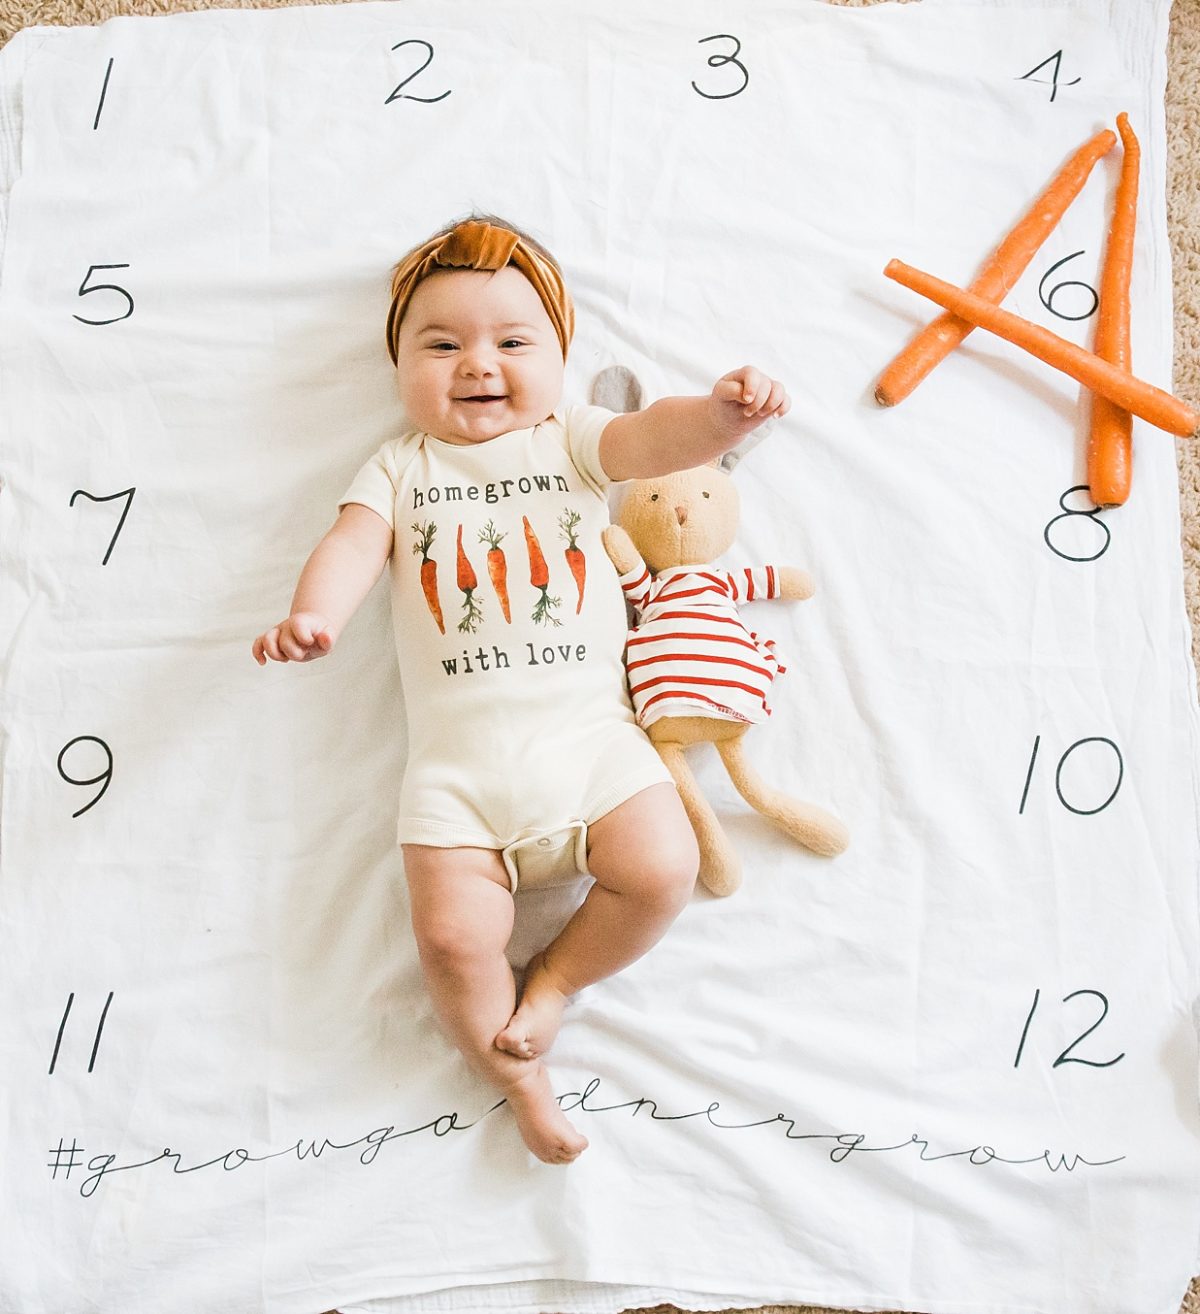 6 Months Young – Hatsy June